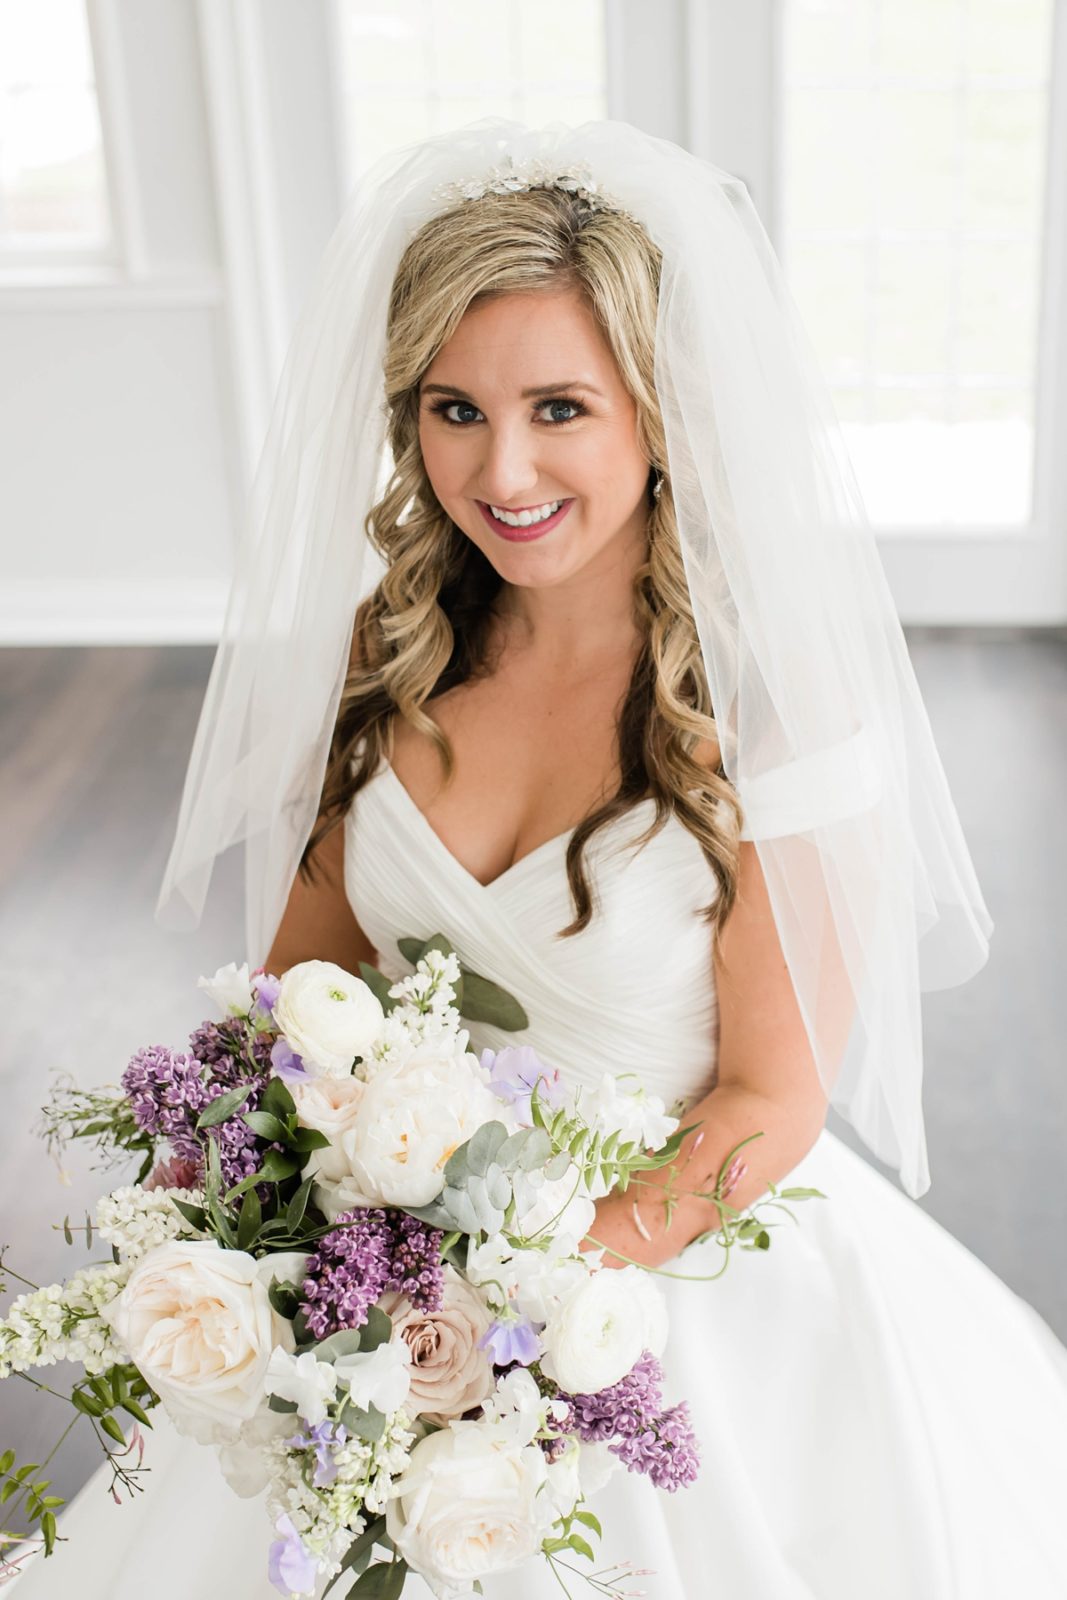 Bride smiling with purple and white wedding bouquet.